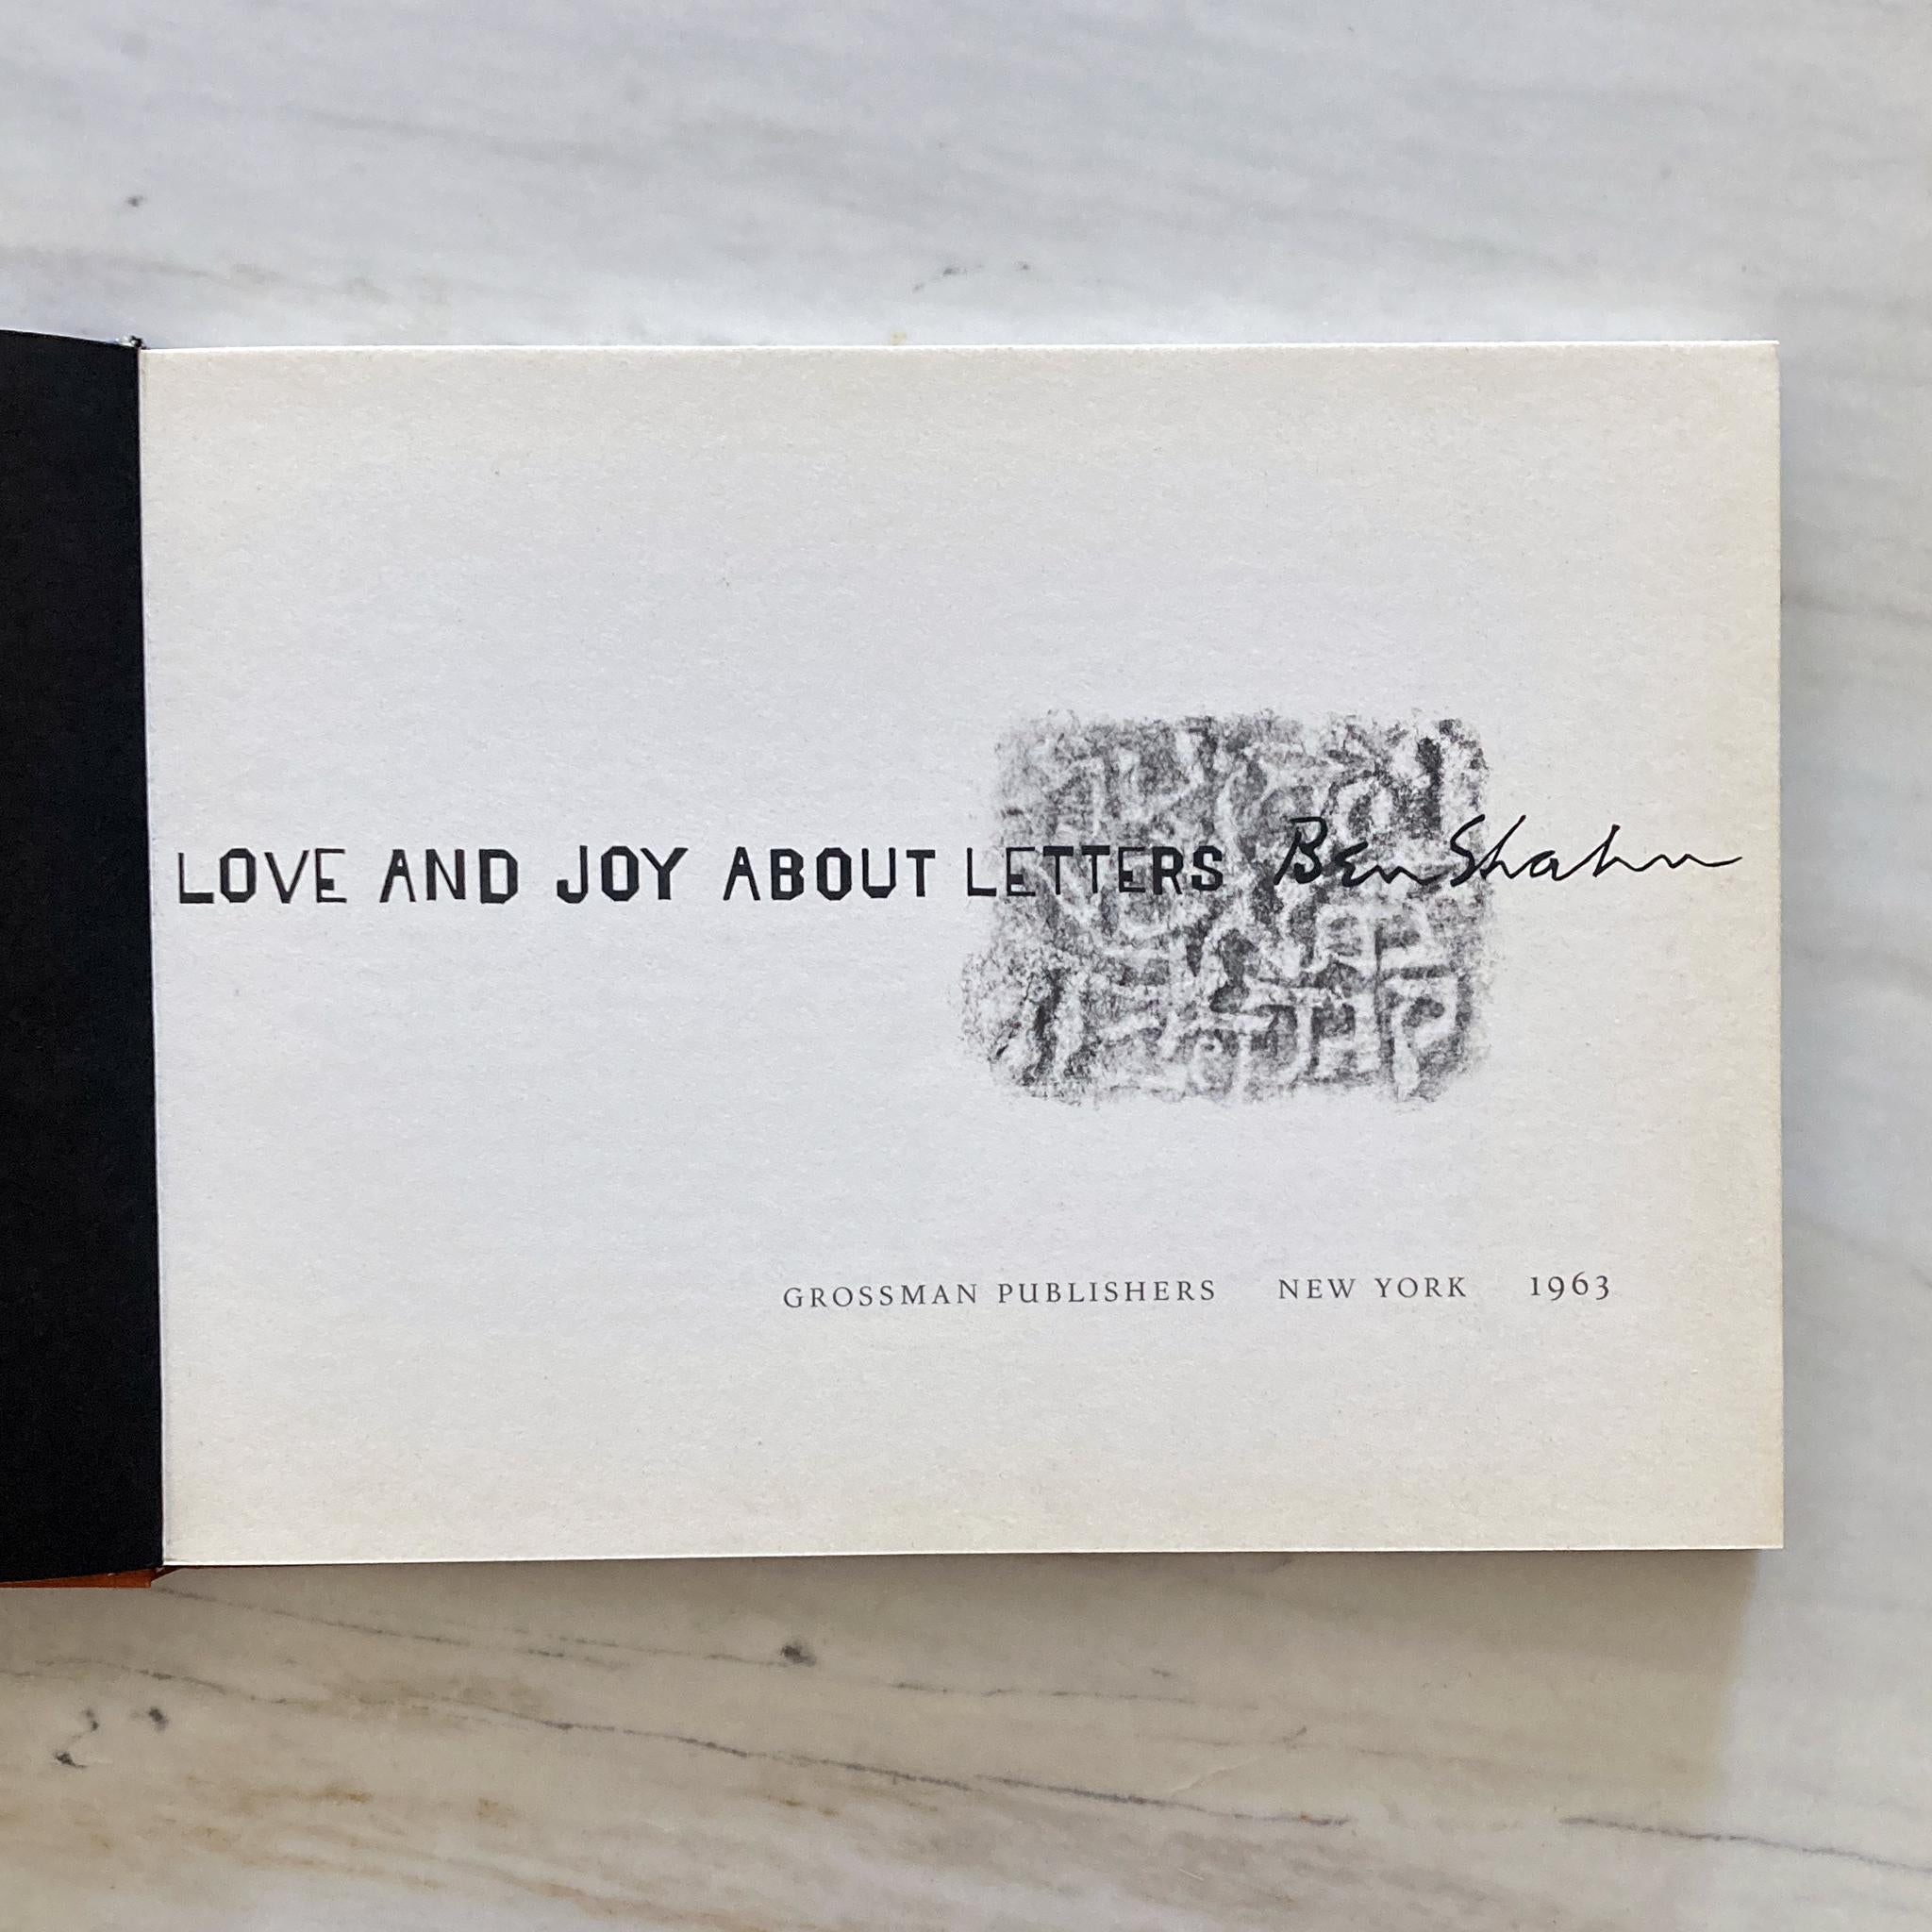 Paper Ben Shahn, Love and Joy About Letters, 1963 1st Edition, Grossman Publishers For Sale